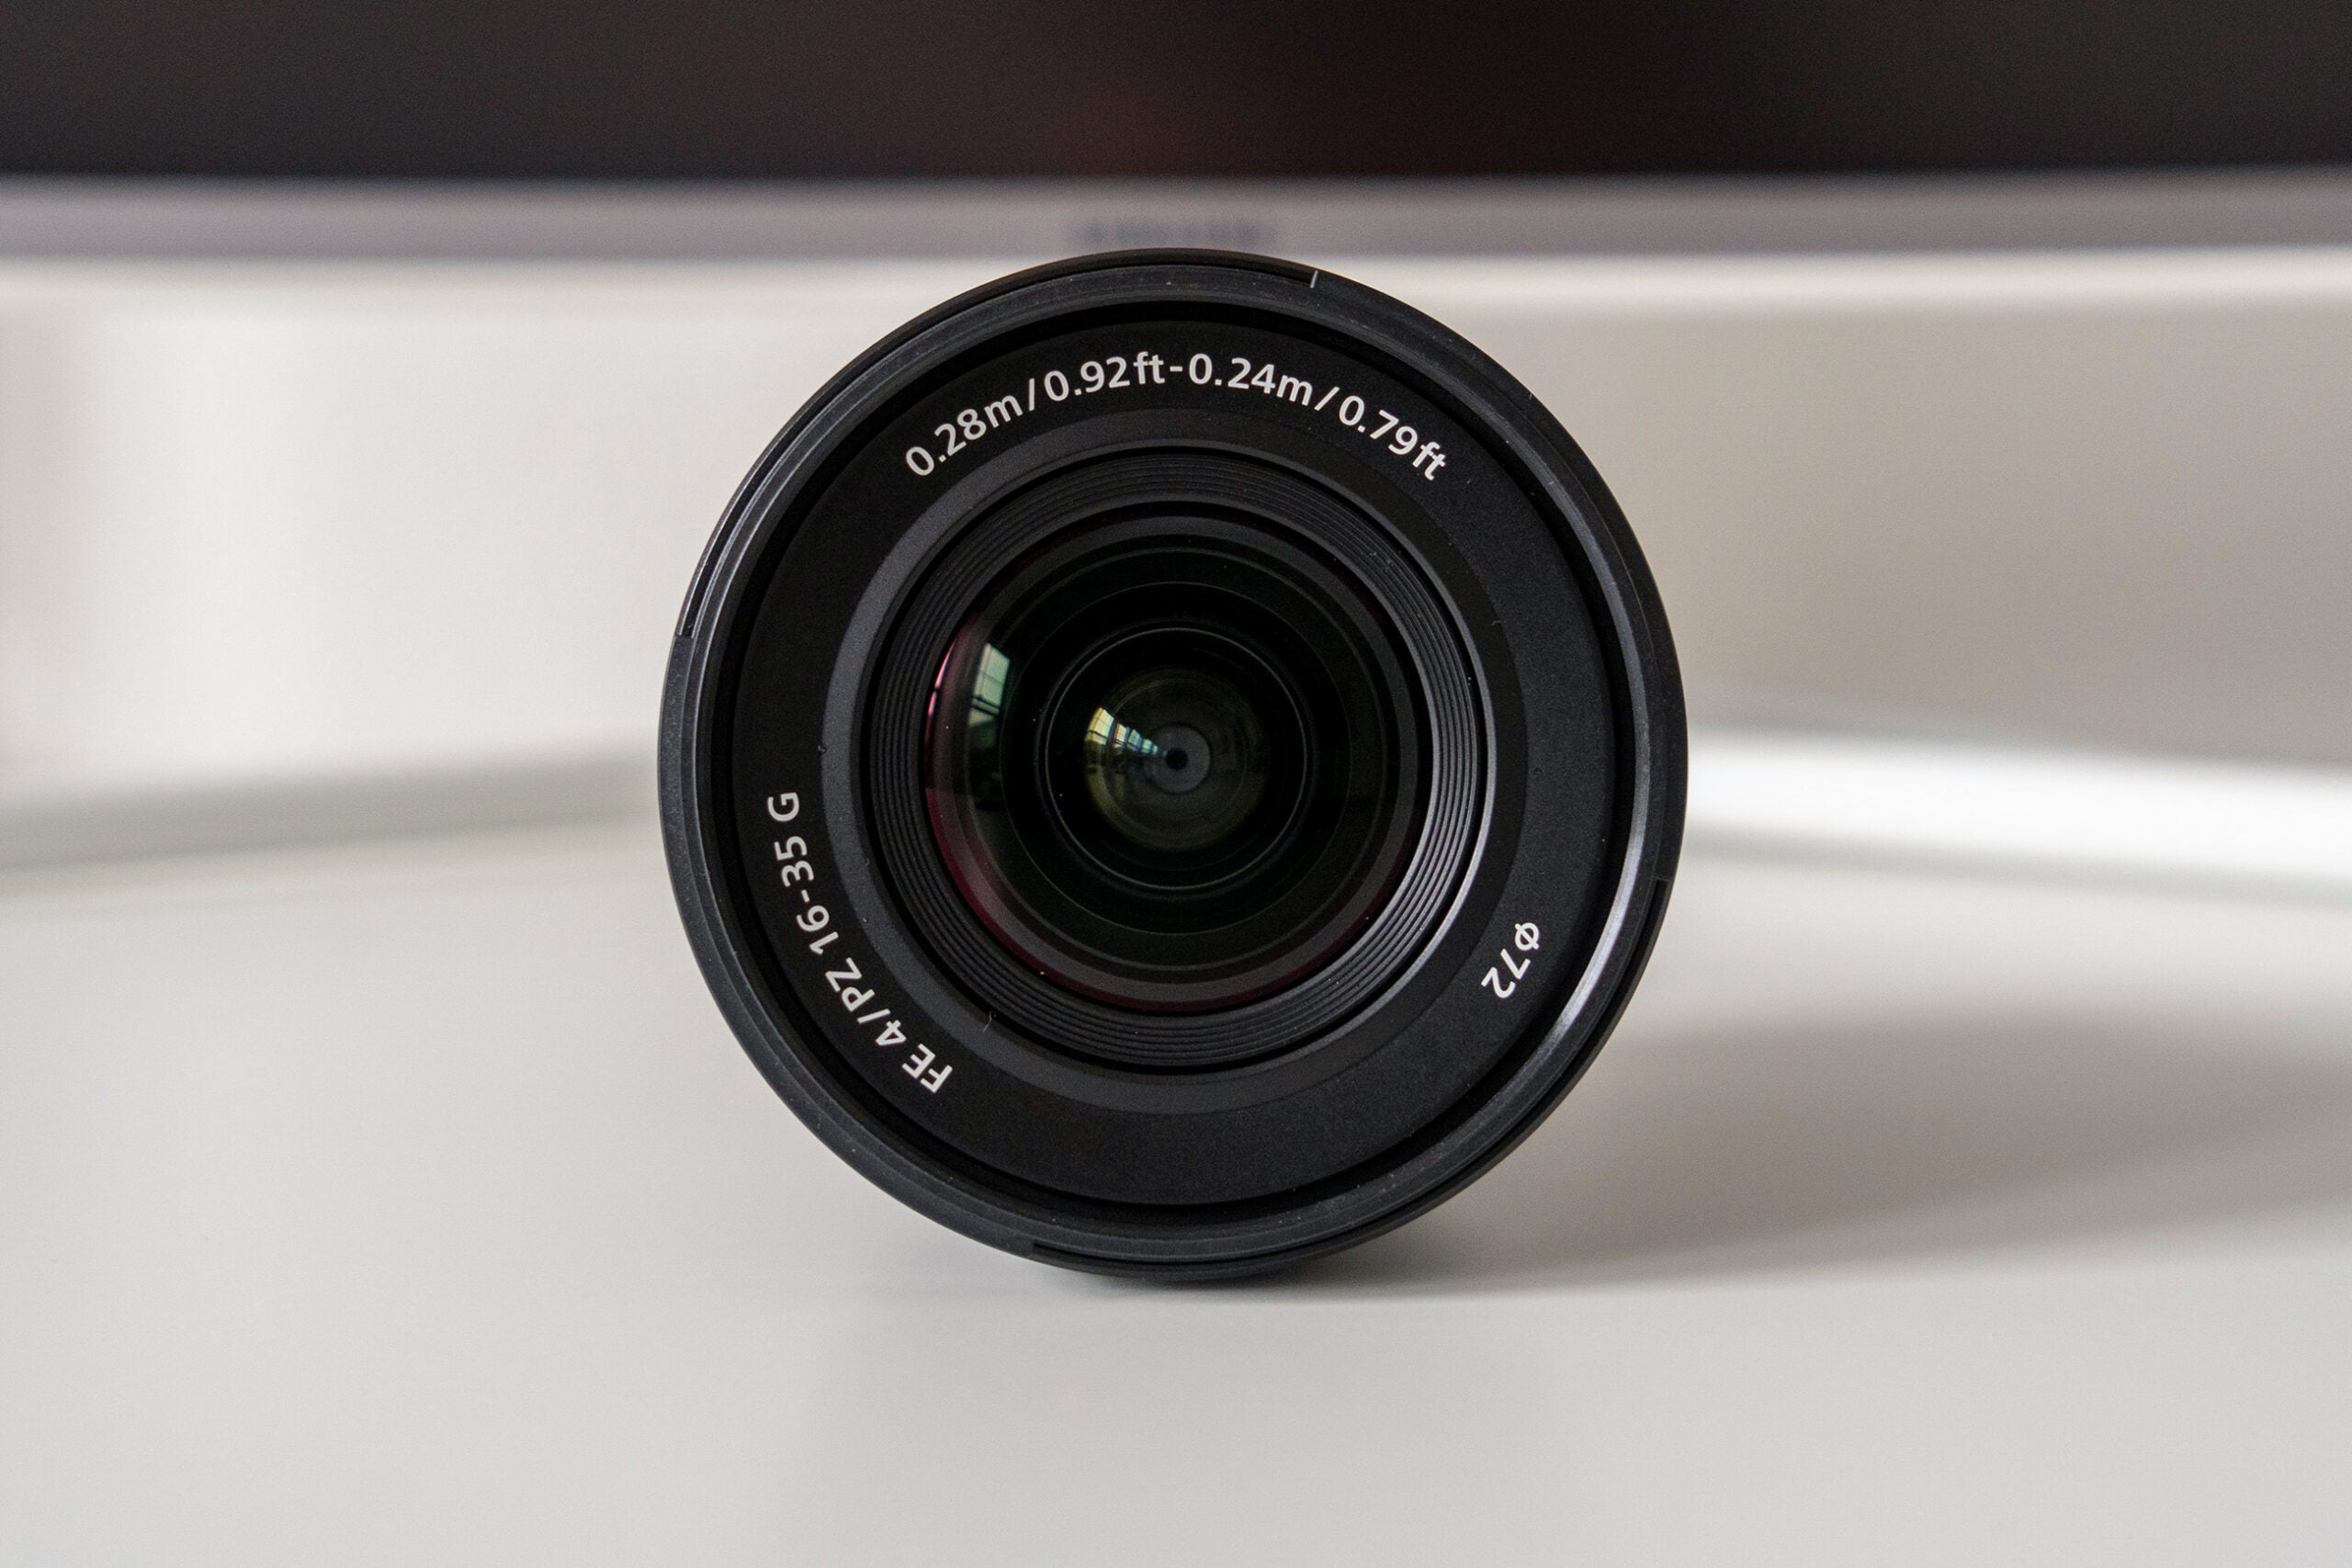 The Sony FE PZ 16-35mm f/4 G is a great lens for content creators and vloggers.